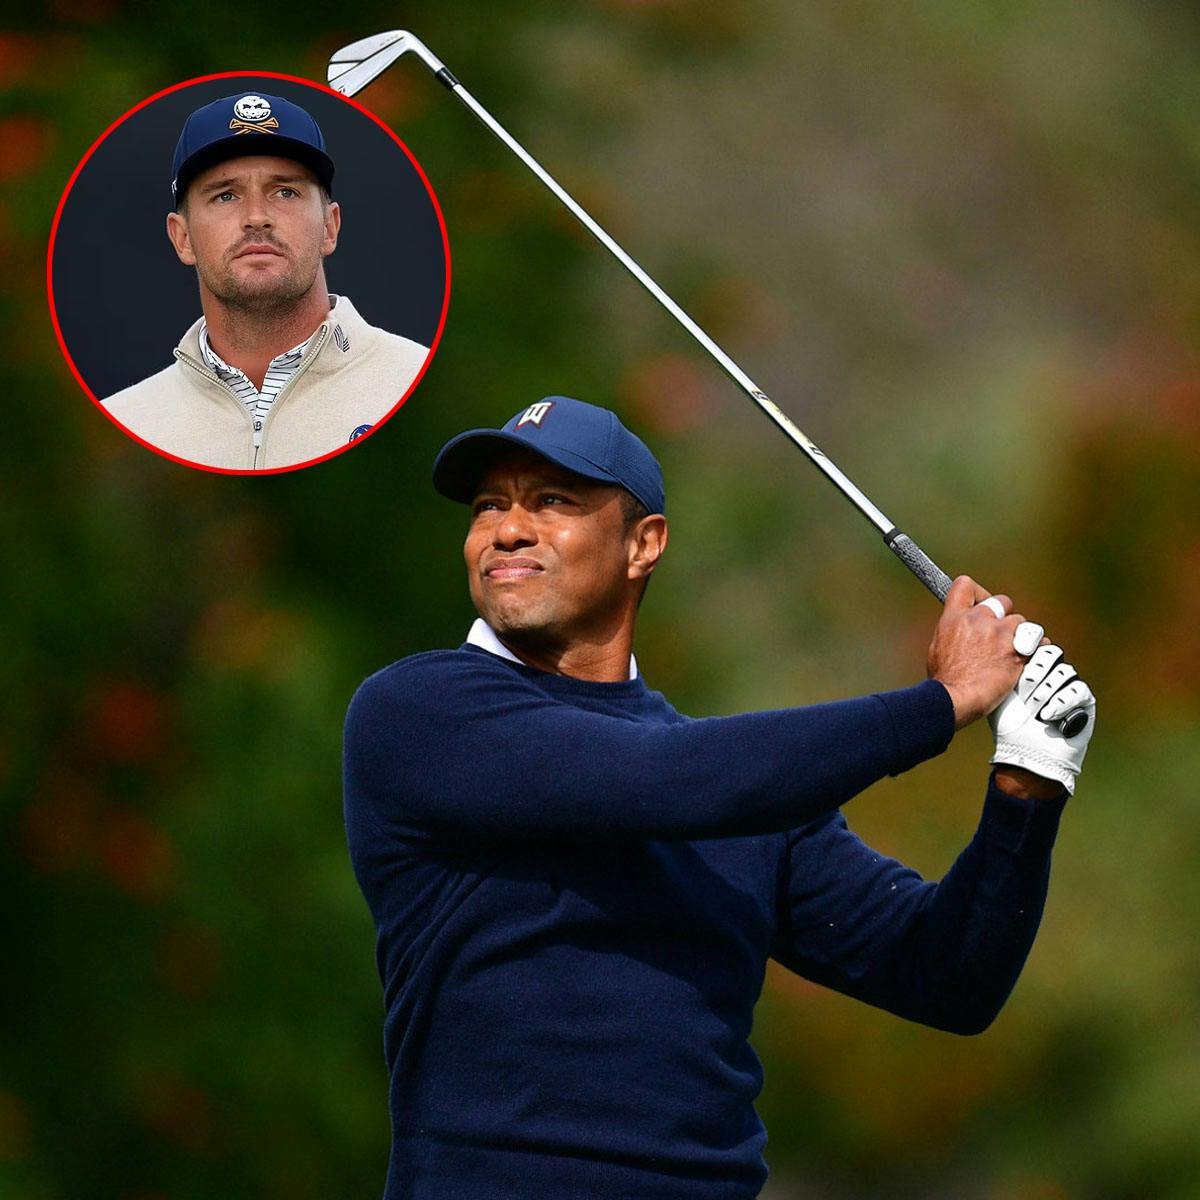 Cover Image for Bryson DeChambeau makes SHOCK prediction about Tiger Woods’ golf future